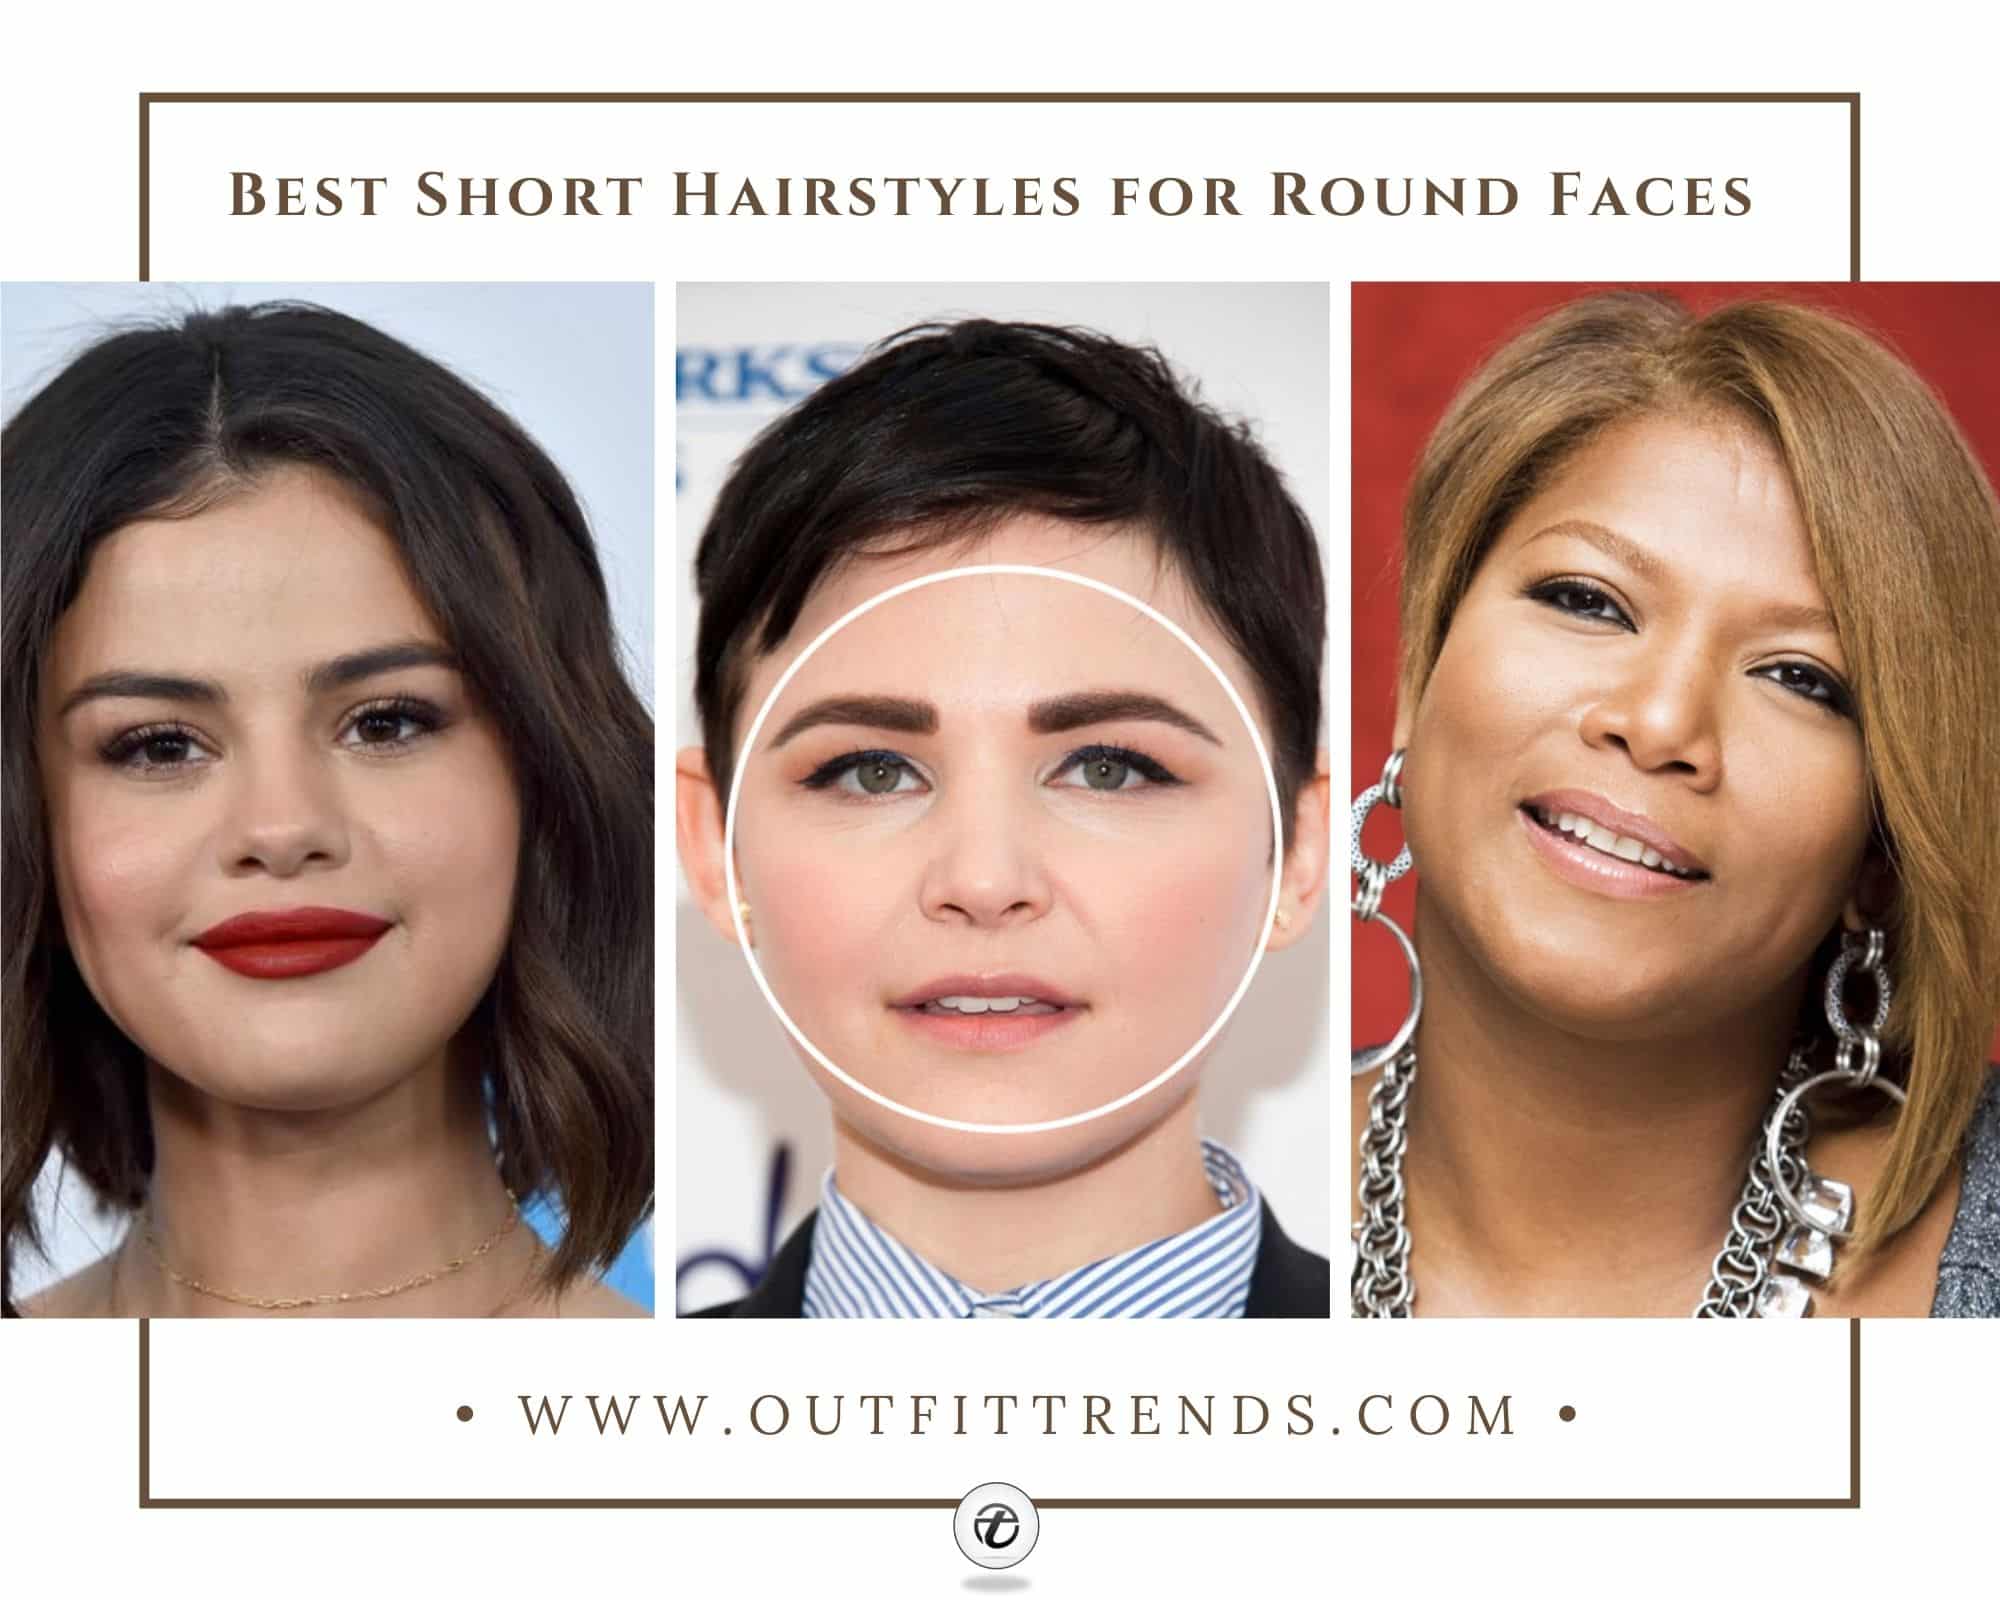 25 Best Hairstyles For Round Faces in 2020  Easy Haircut Ideas for Round  Face Shape